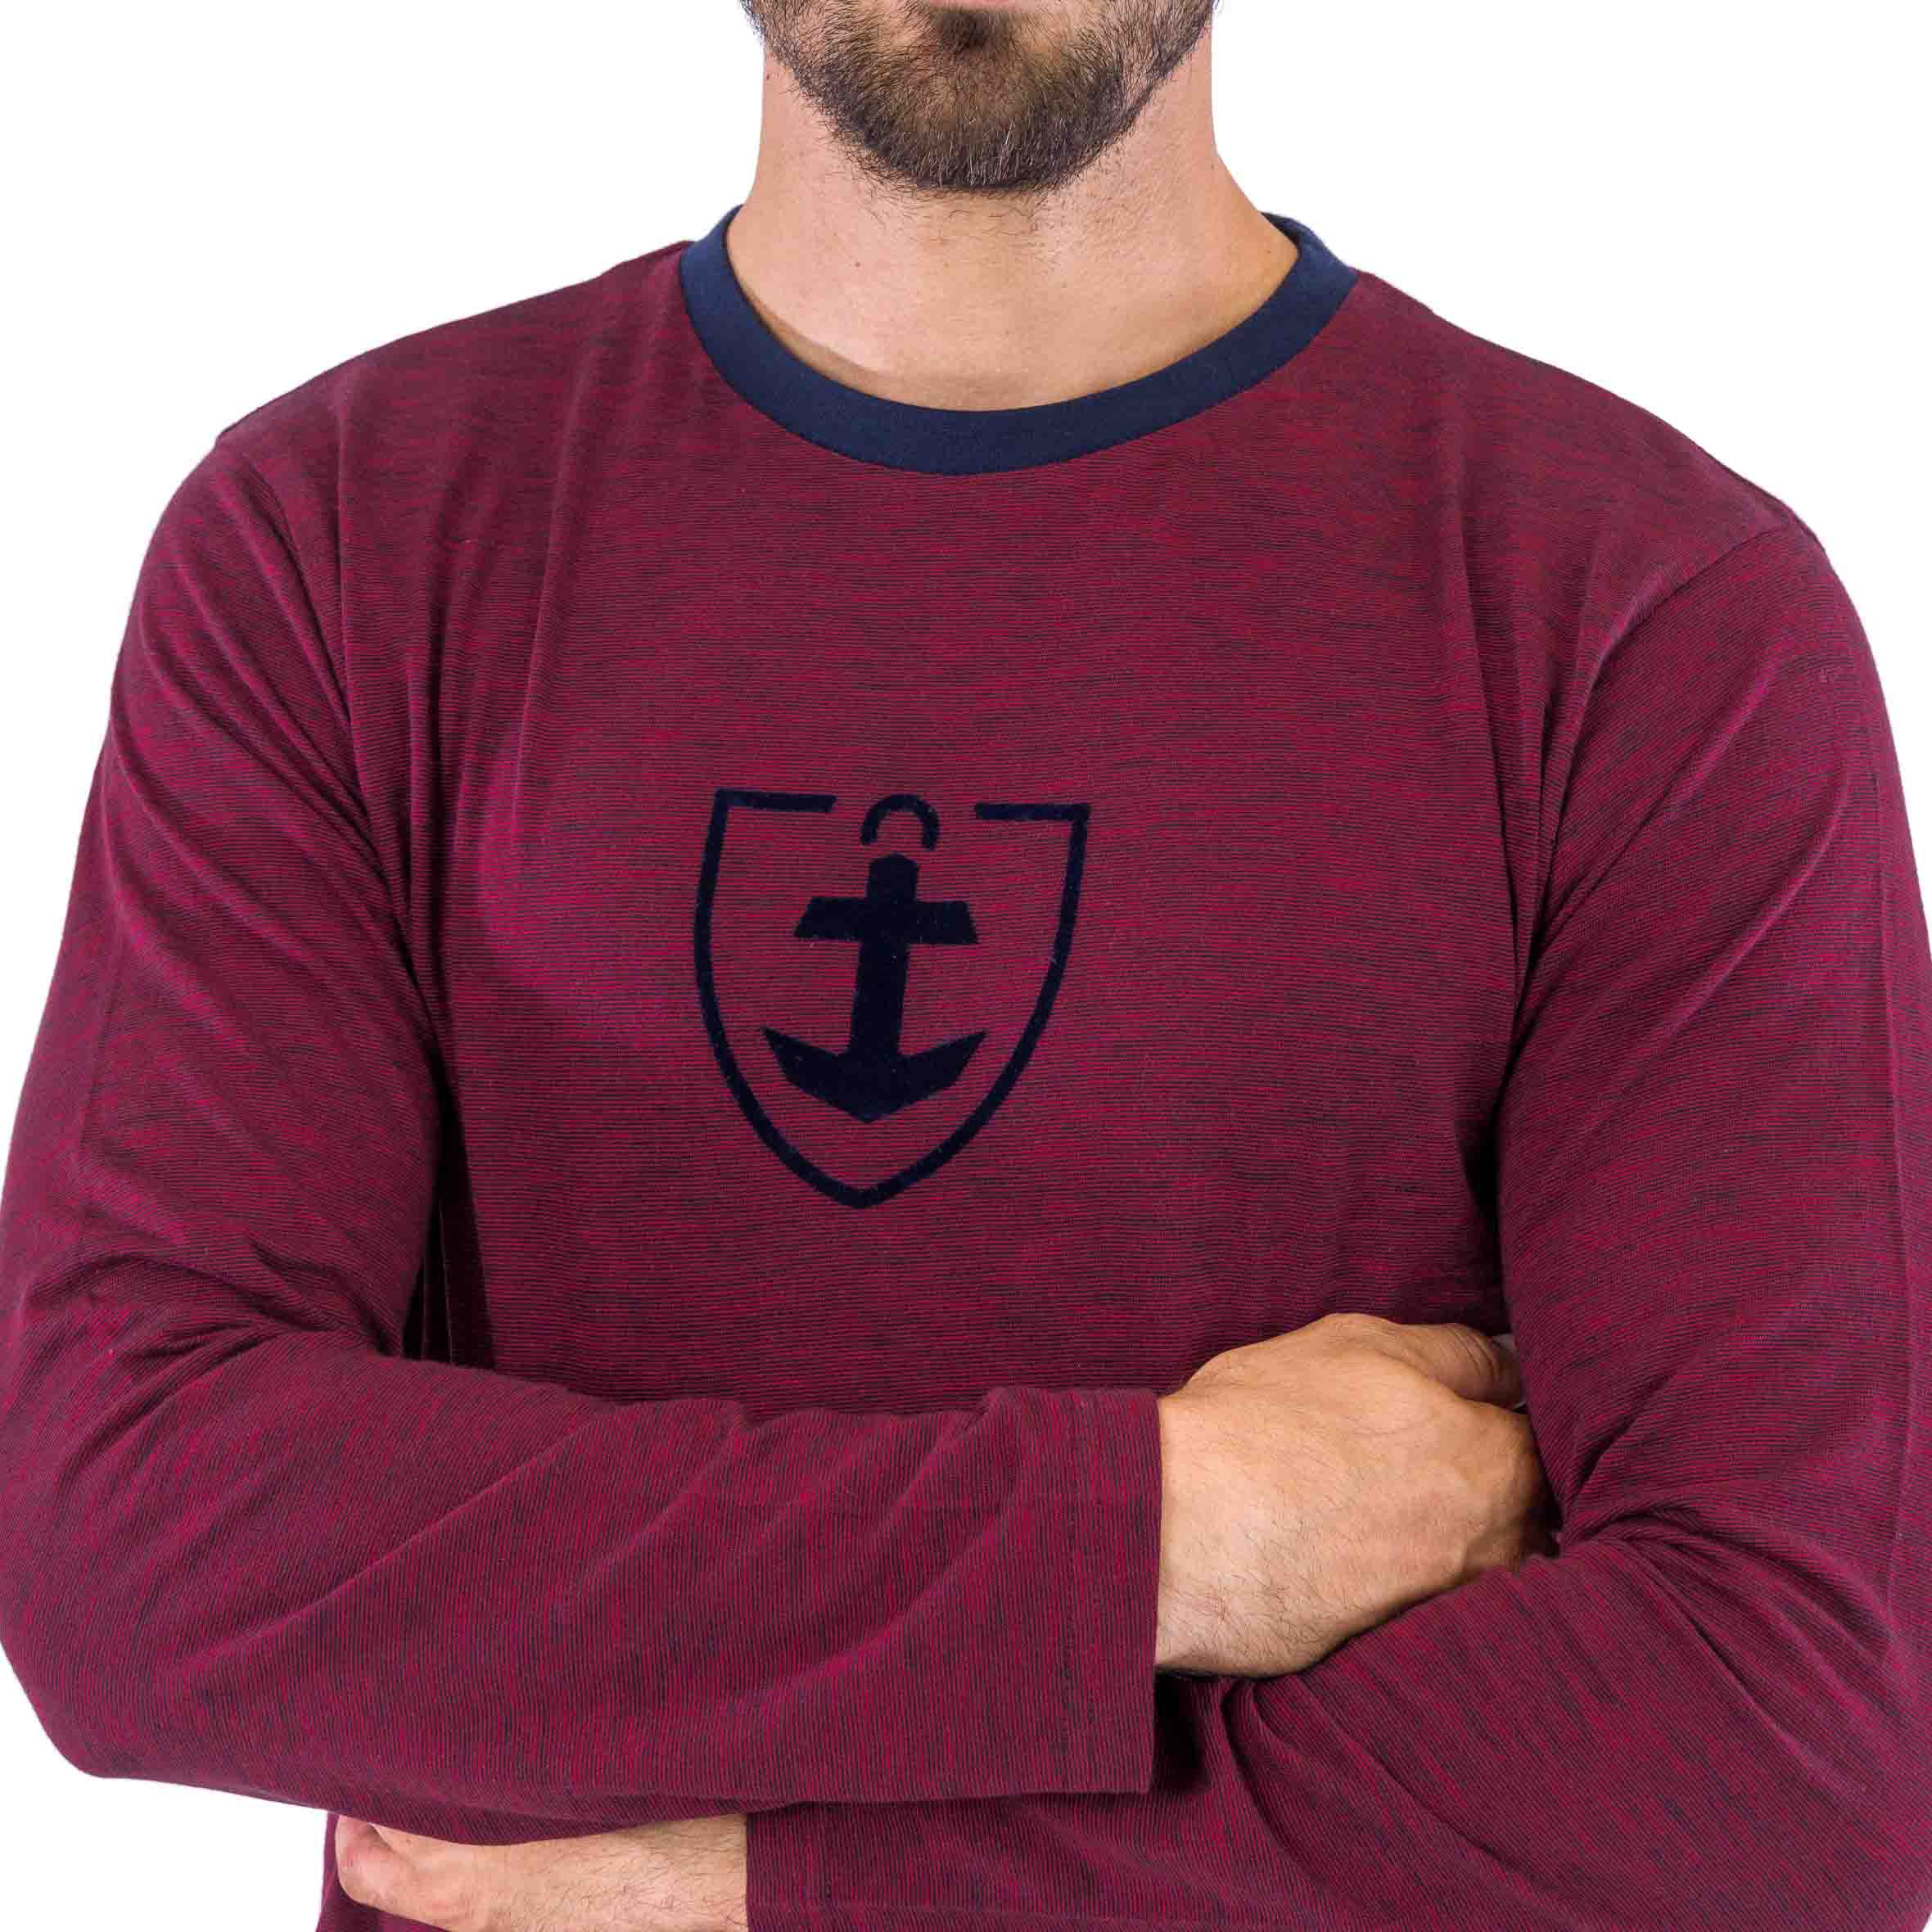 Round Neck Pajamas in Burgundy and Navy Cotton Jersey